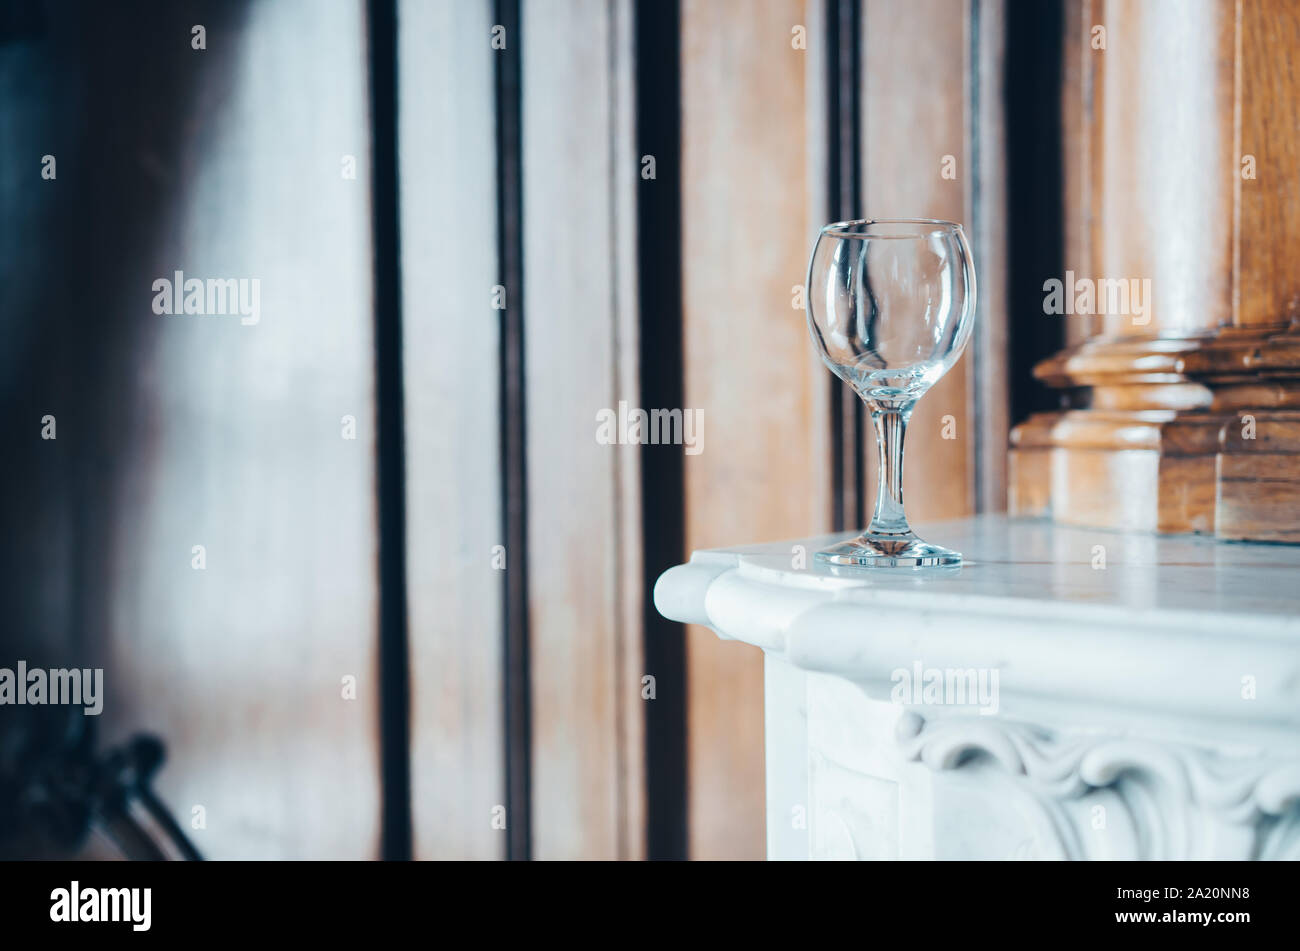 Empty wineglass on the mantelpiece in a beautiful interior Stock Photo